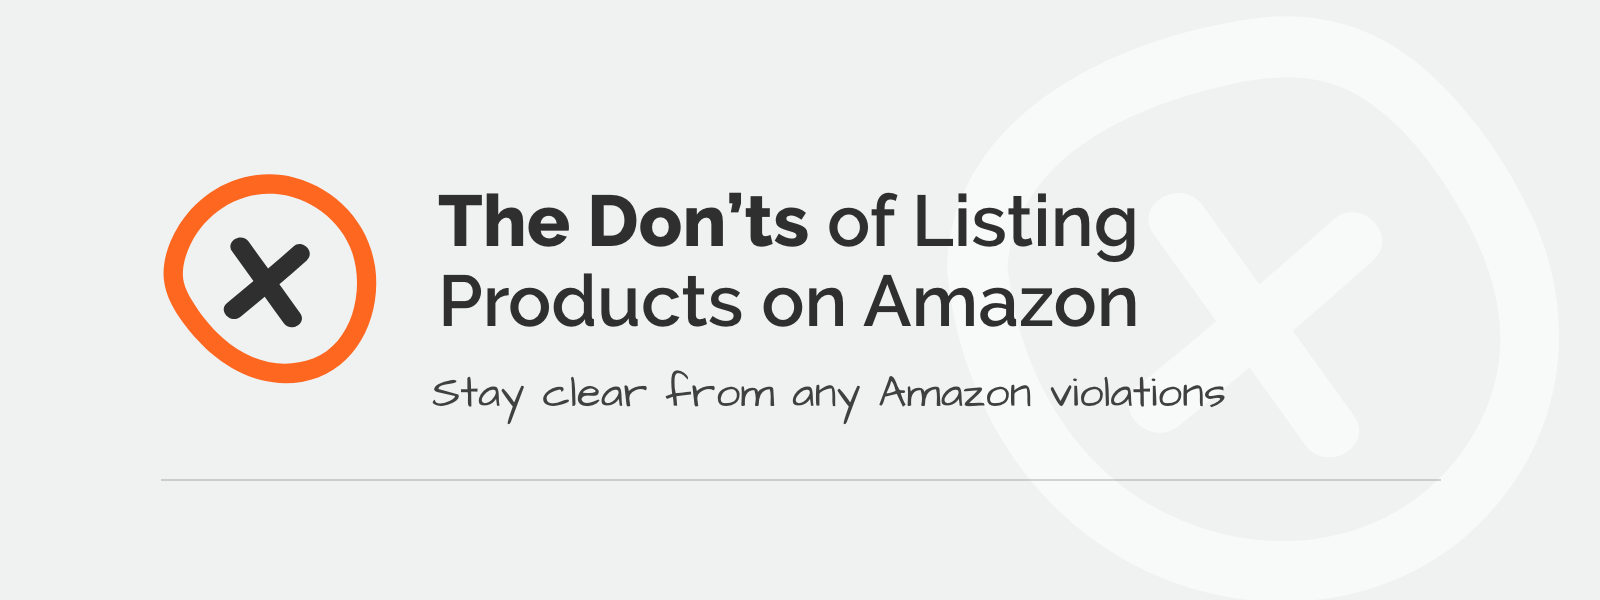 The Don’ts of Listing Products on Amazon